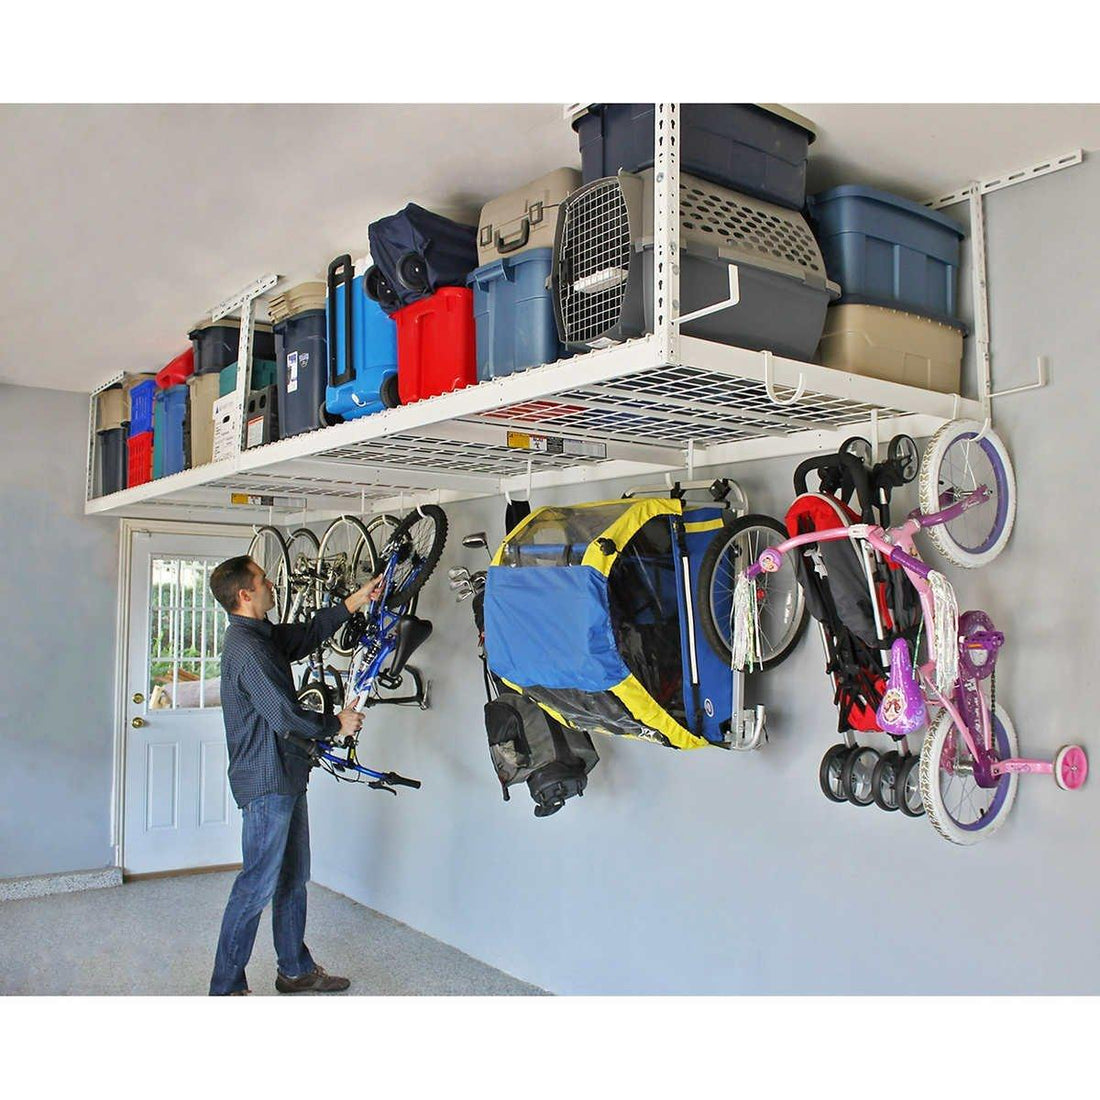 Want An Easy Fix For Your Garage Overhead Organizer? Read This! – CoolYeah  Garage organization & Caster wheels